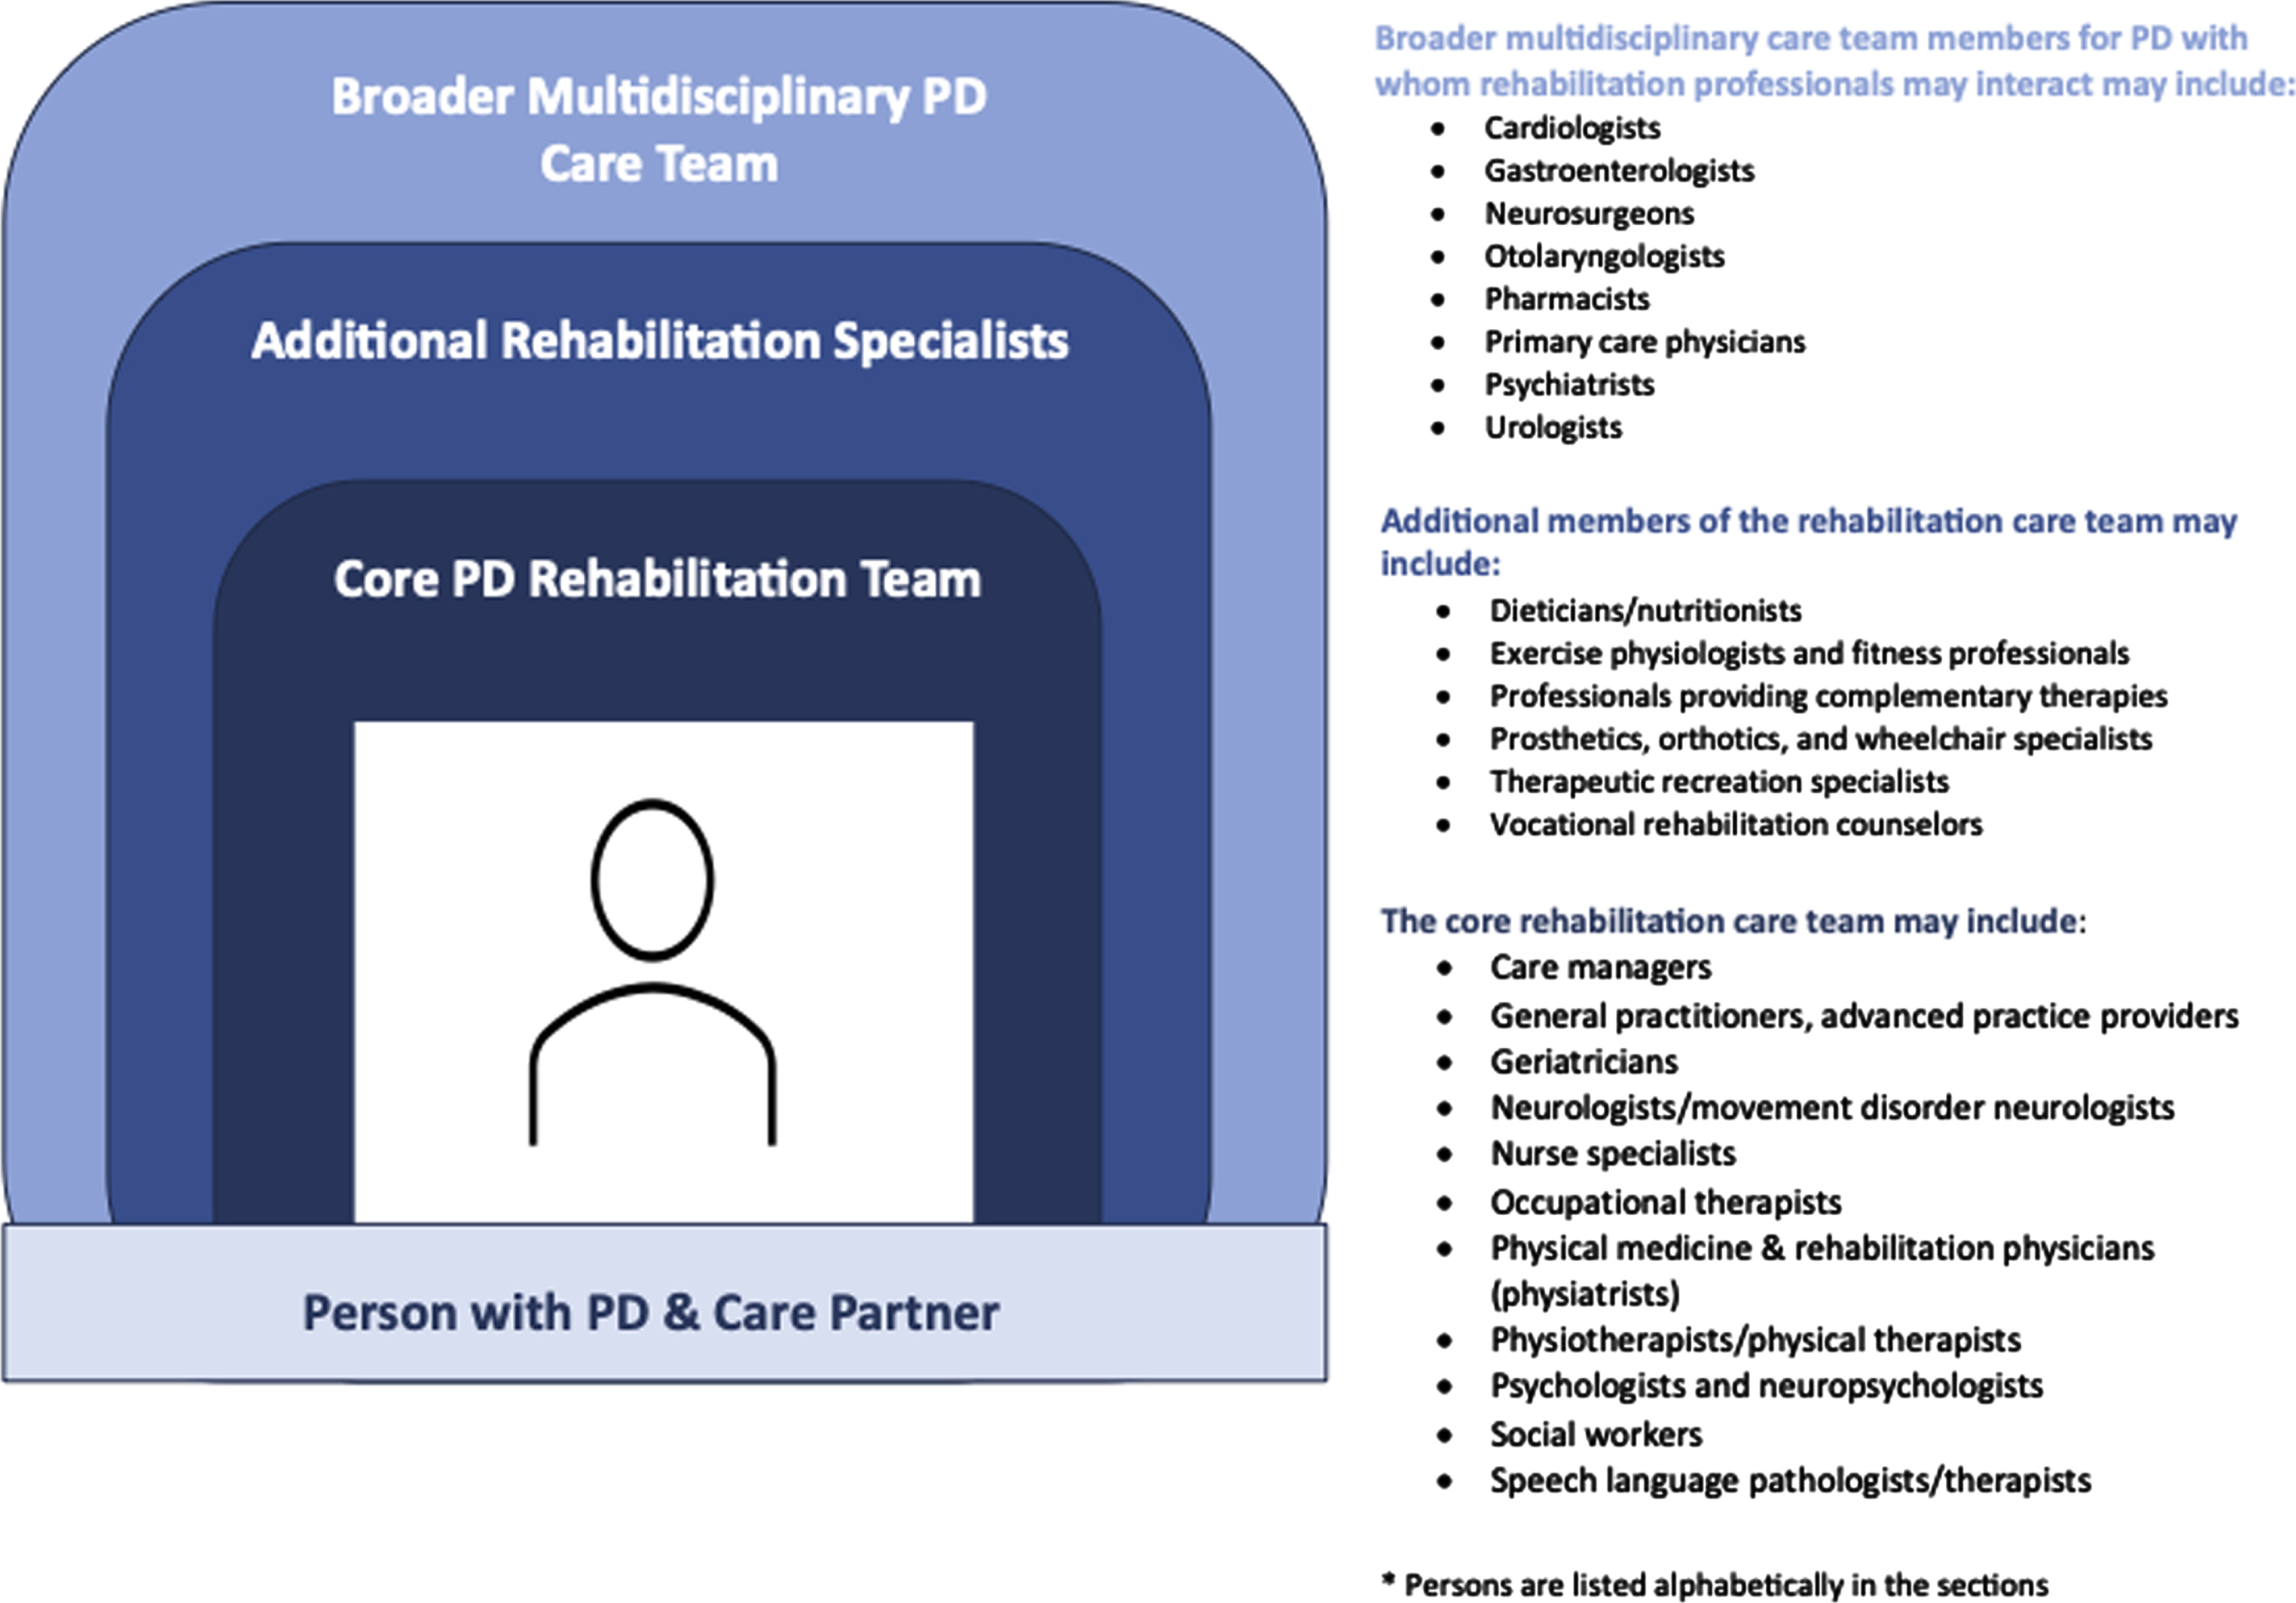 Core Rehabilitation Care Team and Other Relevant Healthcare Professionals for PD.